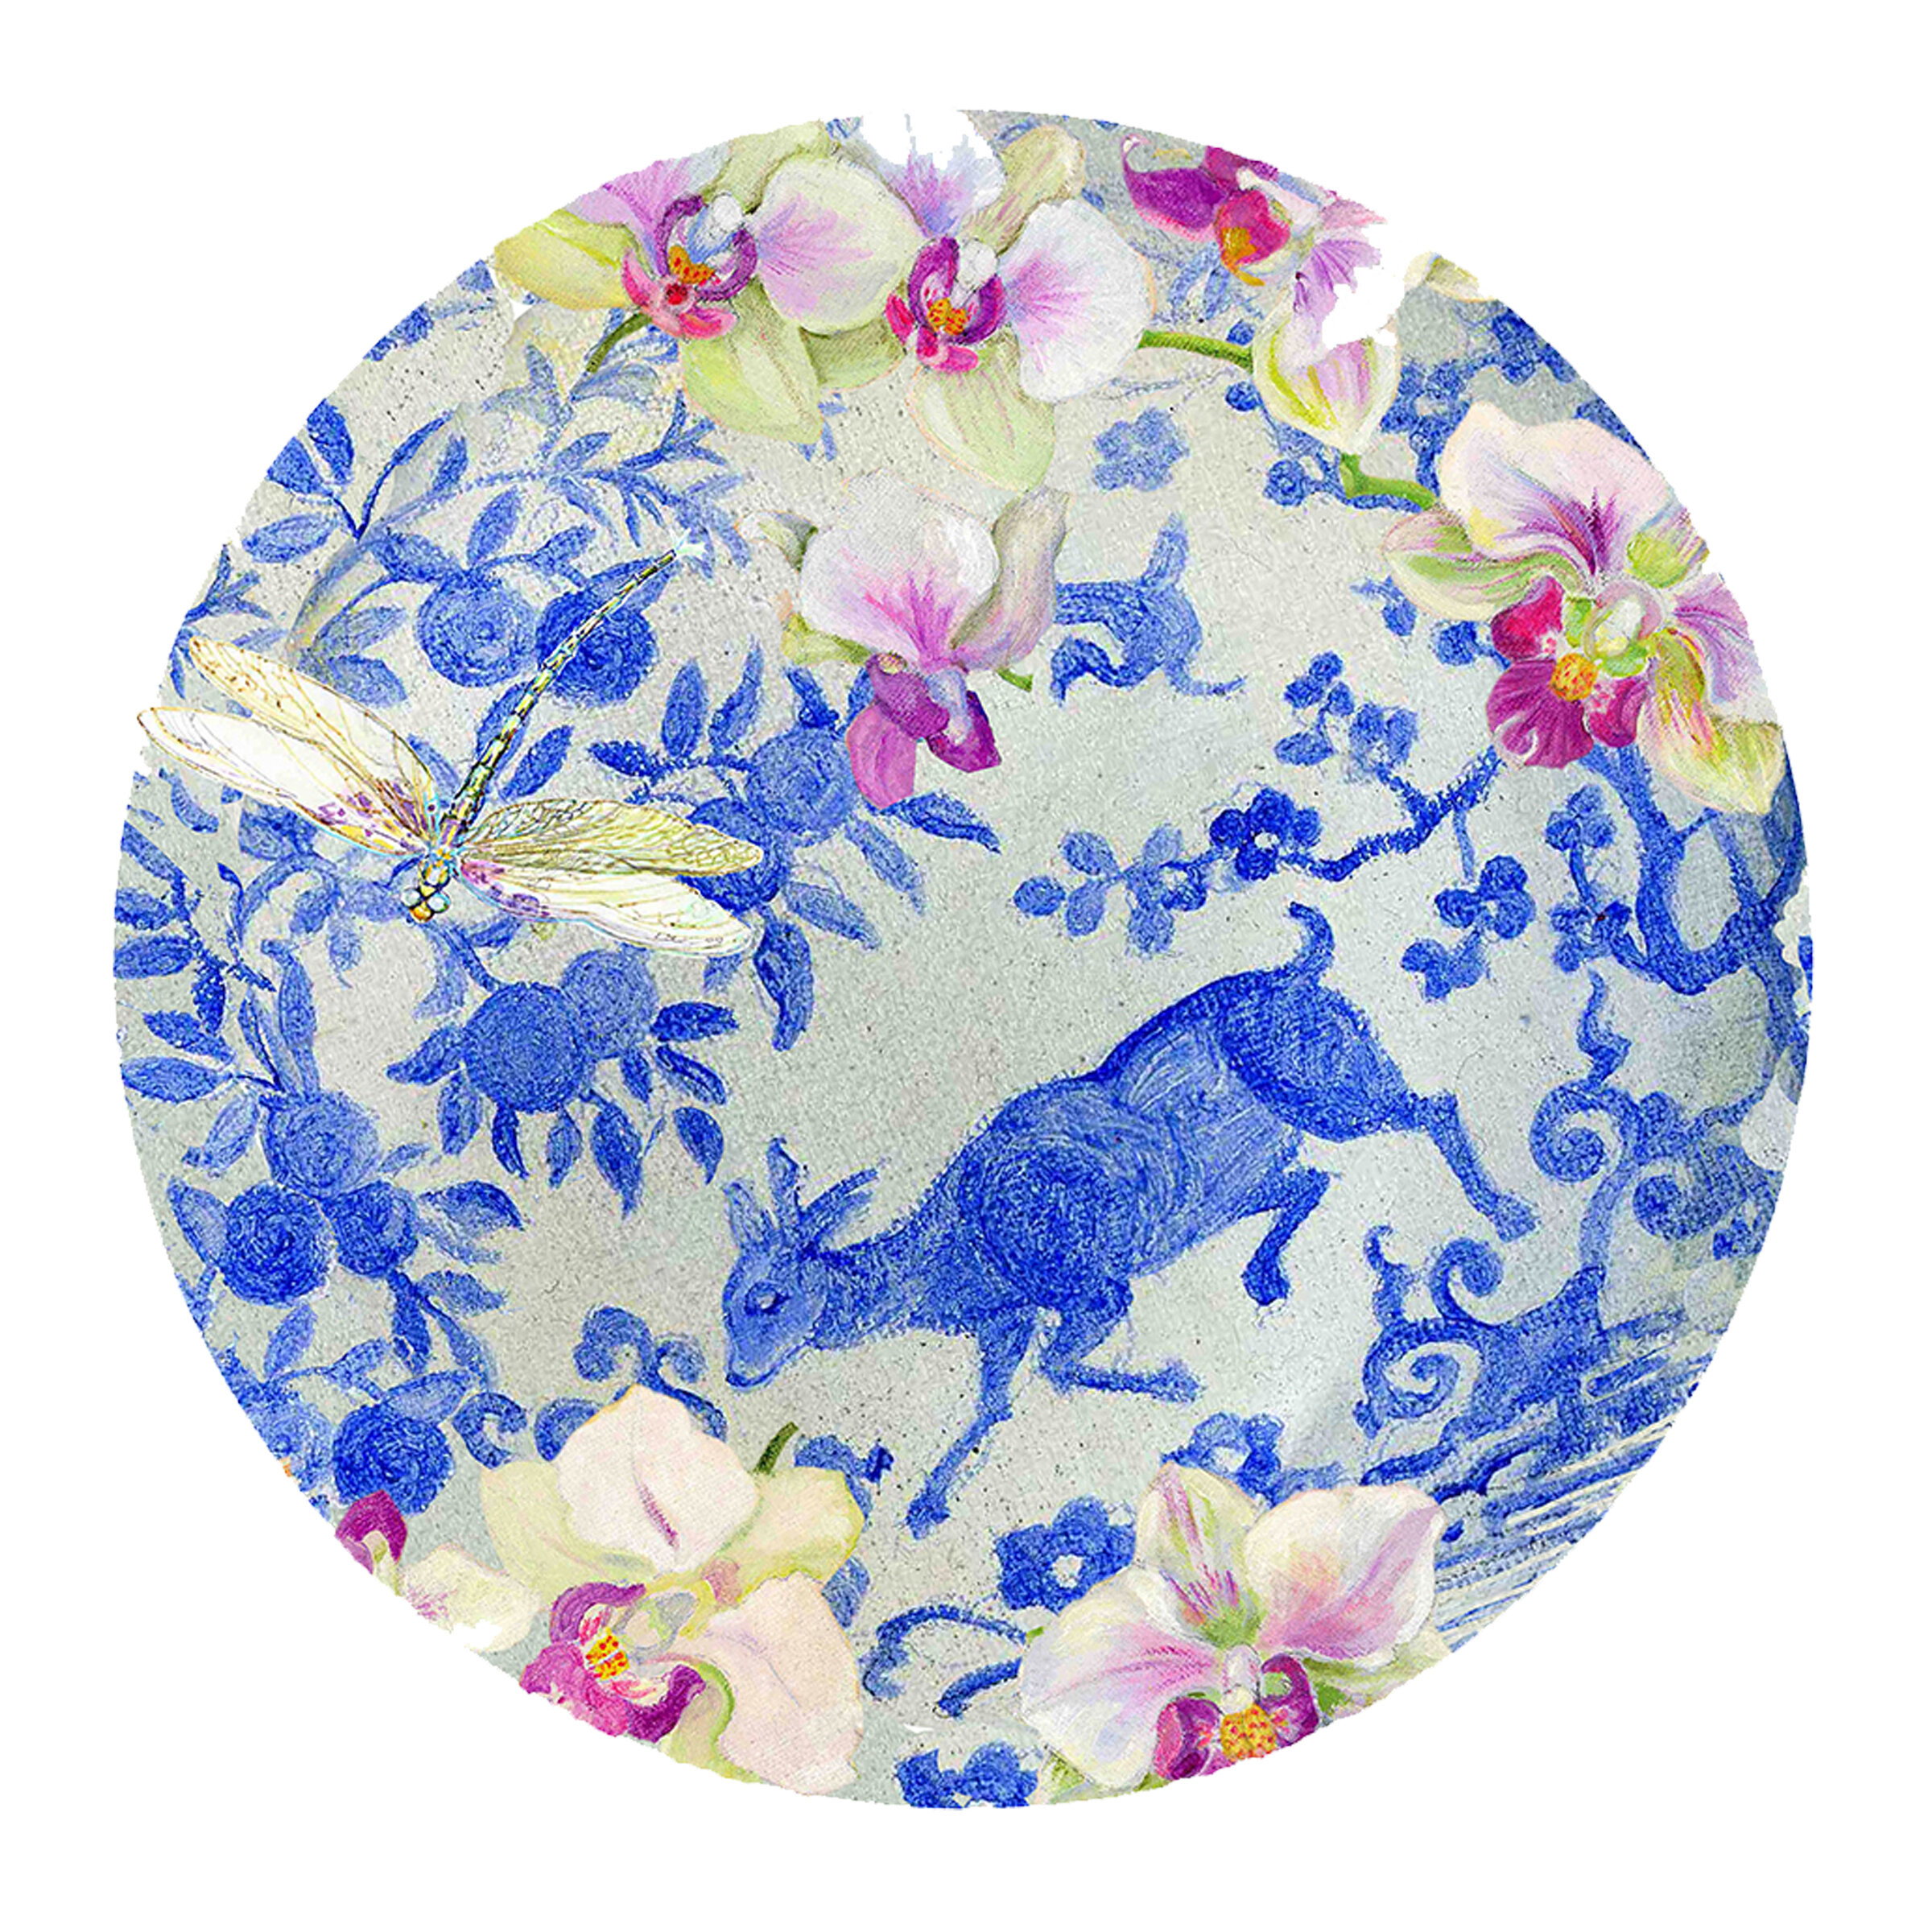 7.Ming deer and orchid plate .jpg